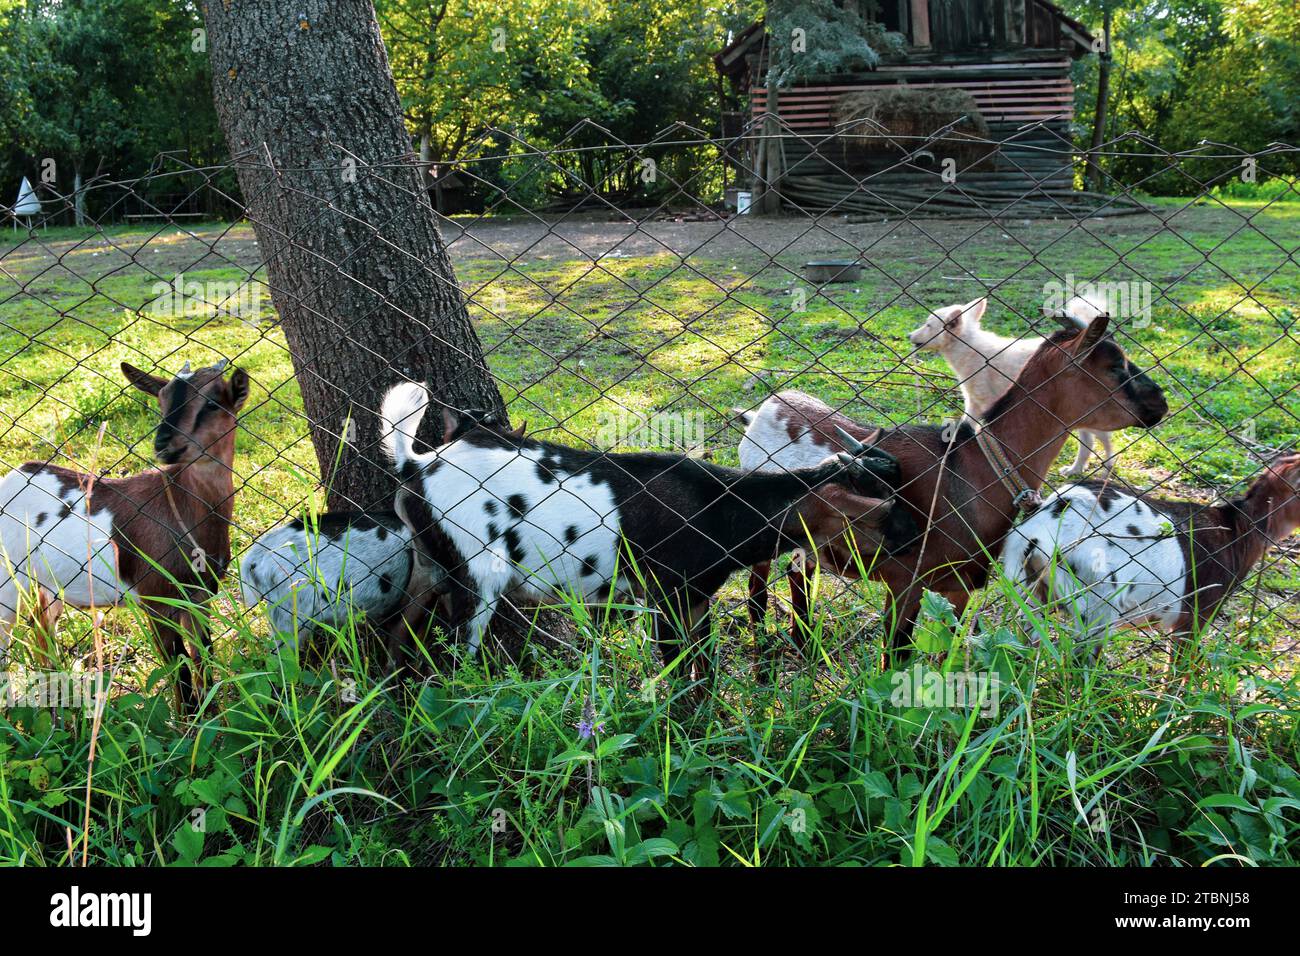 Goats and dog on a wire-fenced farm. Green grass in the background and the thick trunk of an old tree Stock Photo